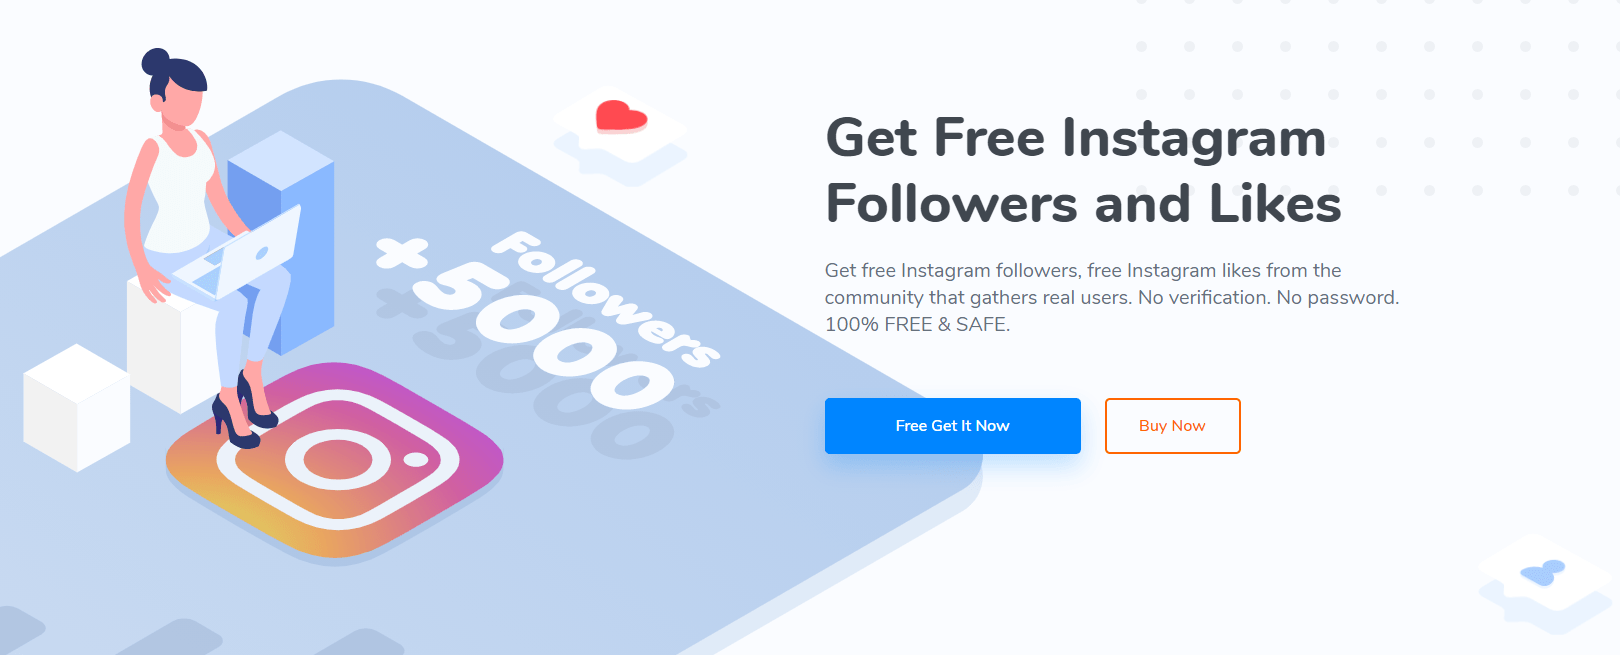 Followers Gallery Will Get Your More Instagram Followers and Likes